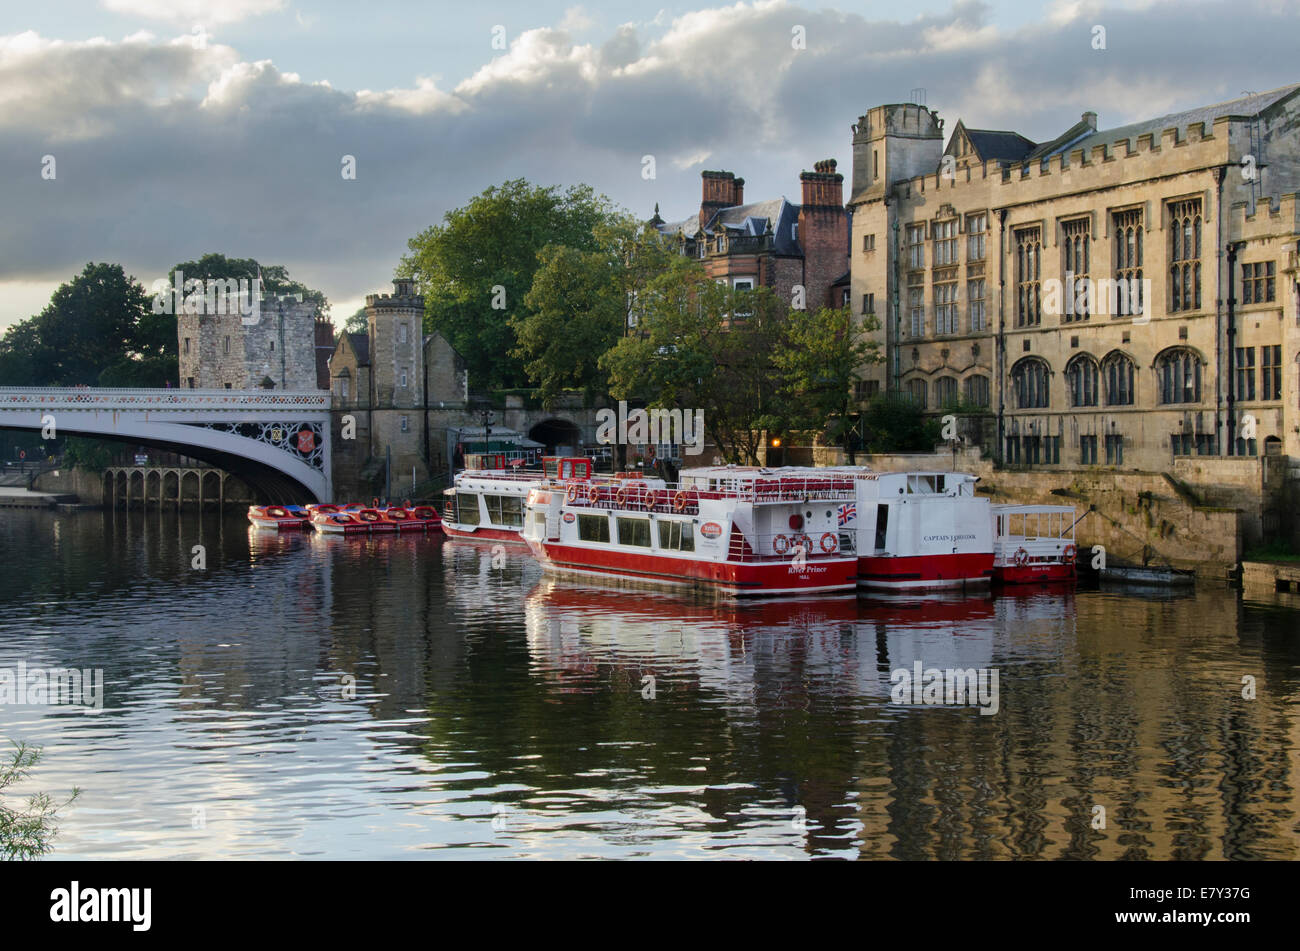 City cruise boats moored in summer evening sun by Guildhall & Lendal Bridge - view from south bank of River Ouse, York, North Yorkshire, England, UK. Stock Photo